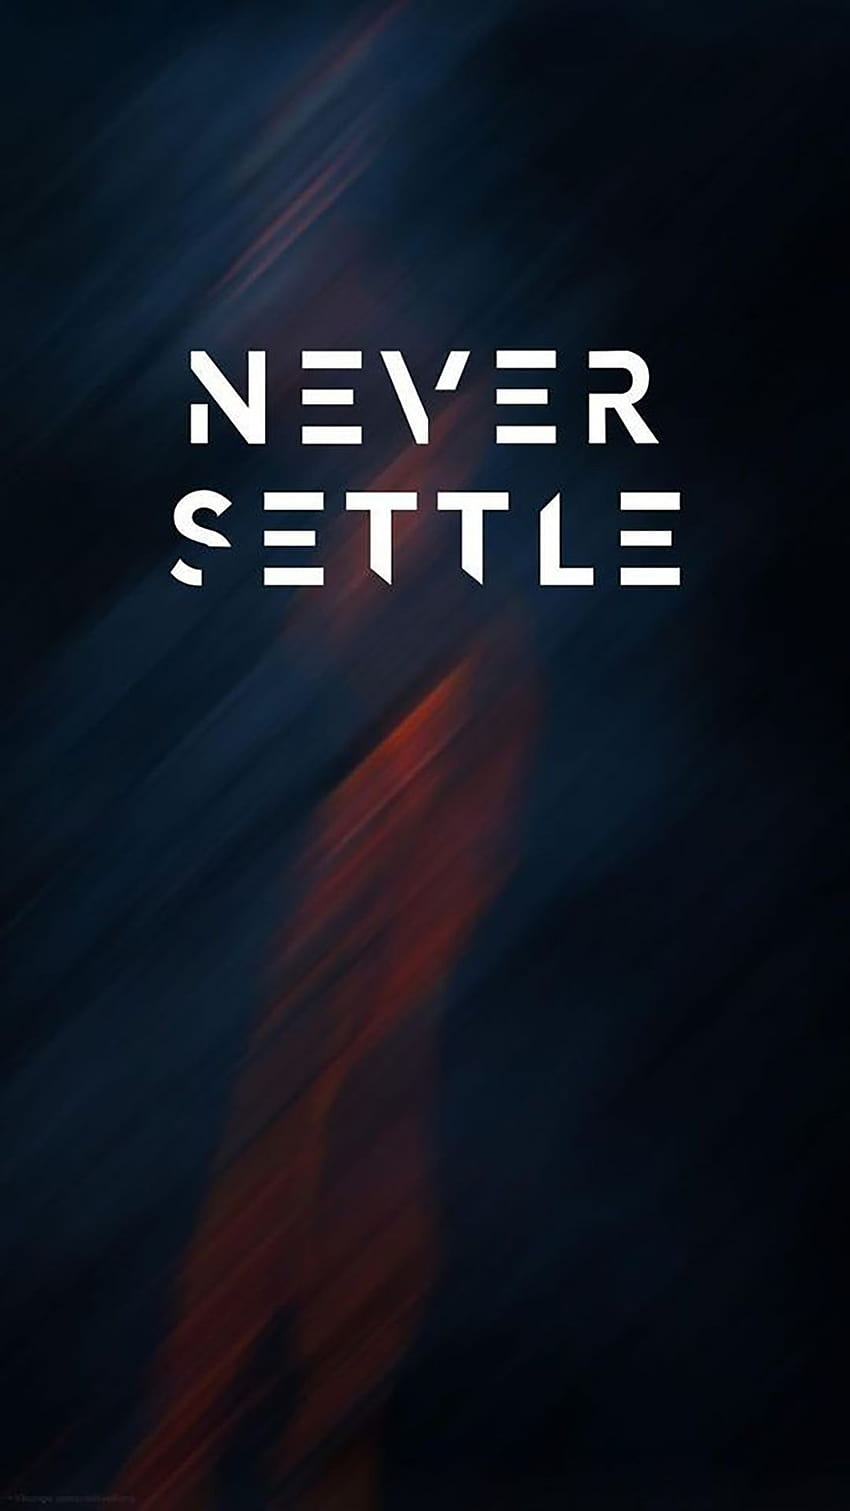 Amoled Black For PC, never give up android HD phone wallpaper